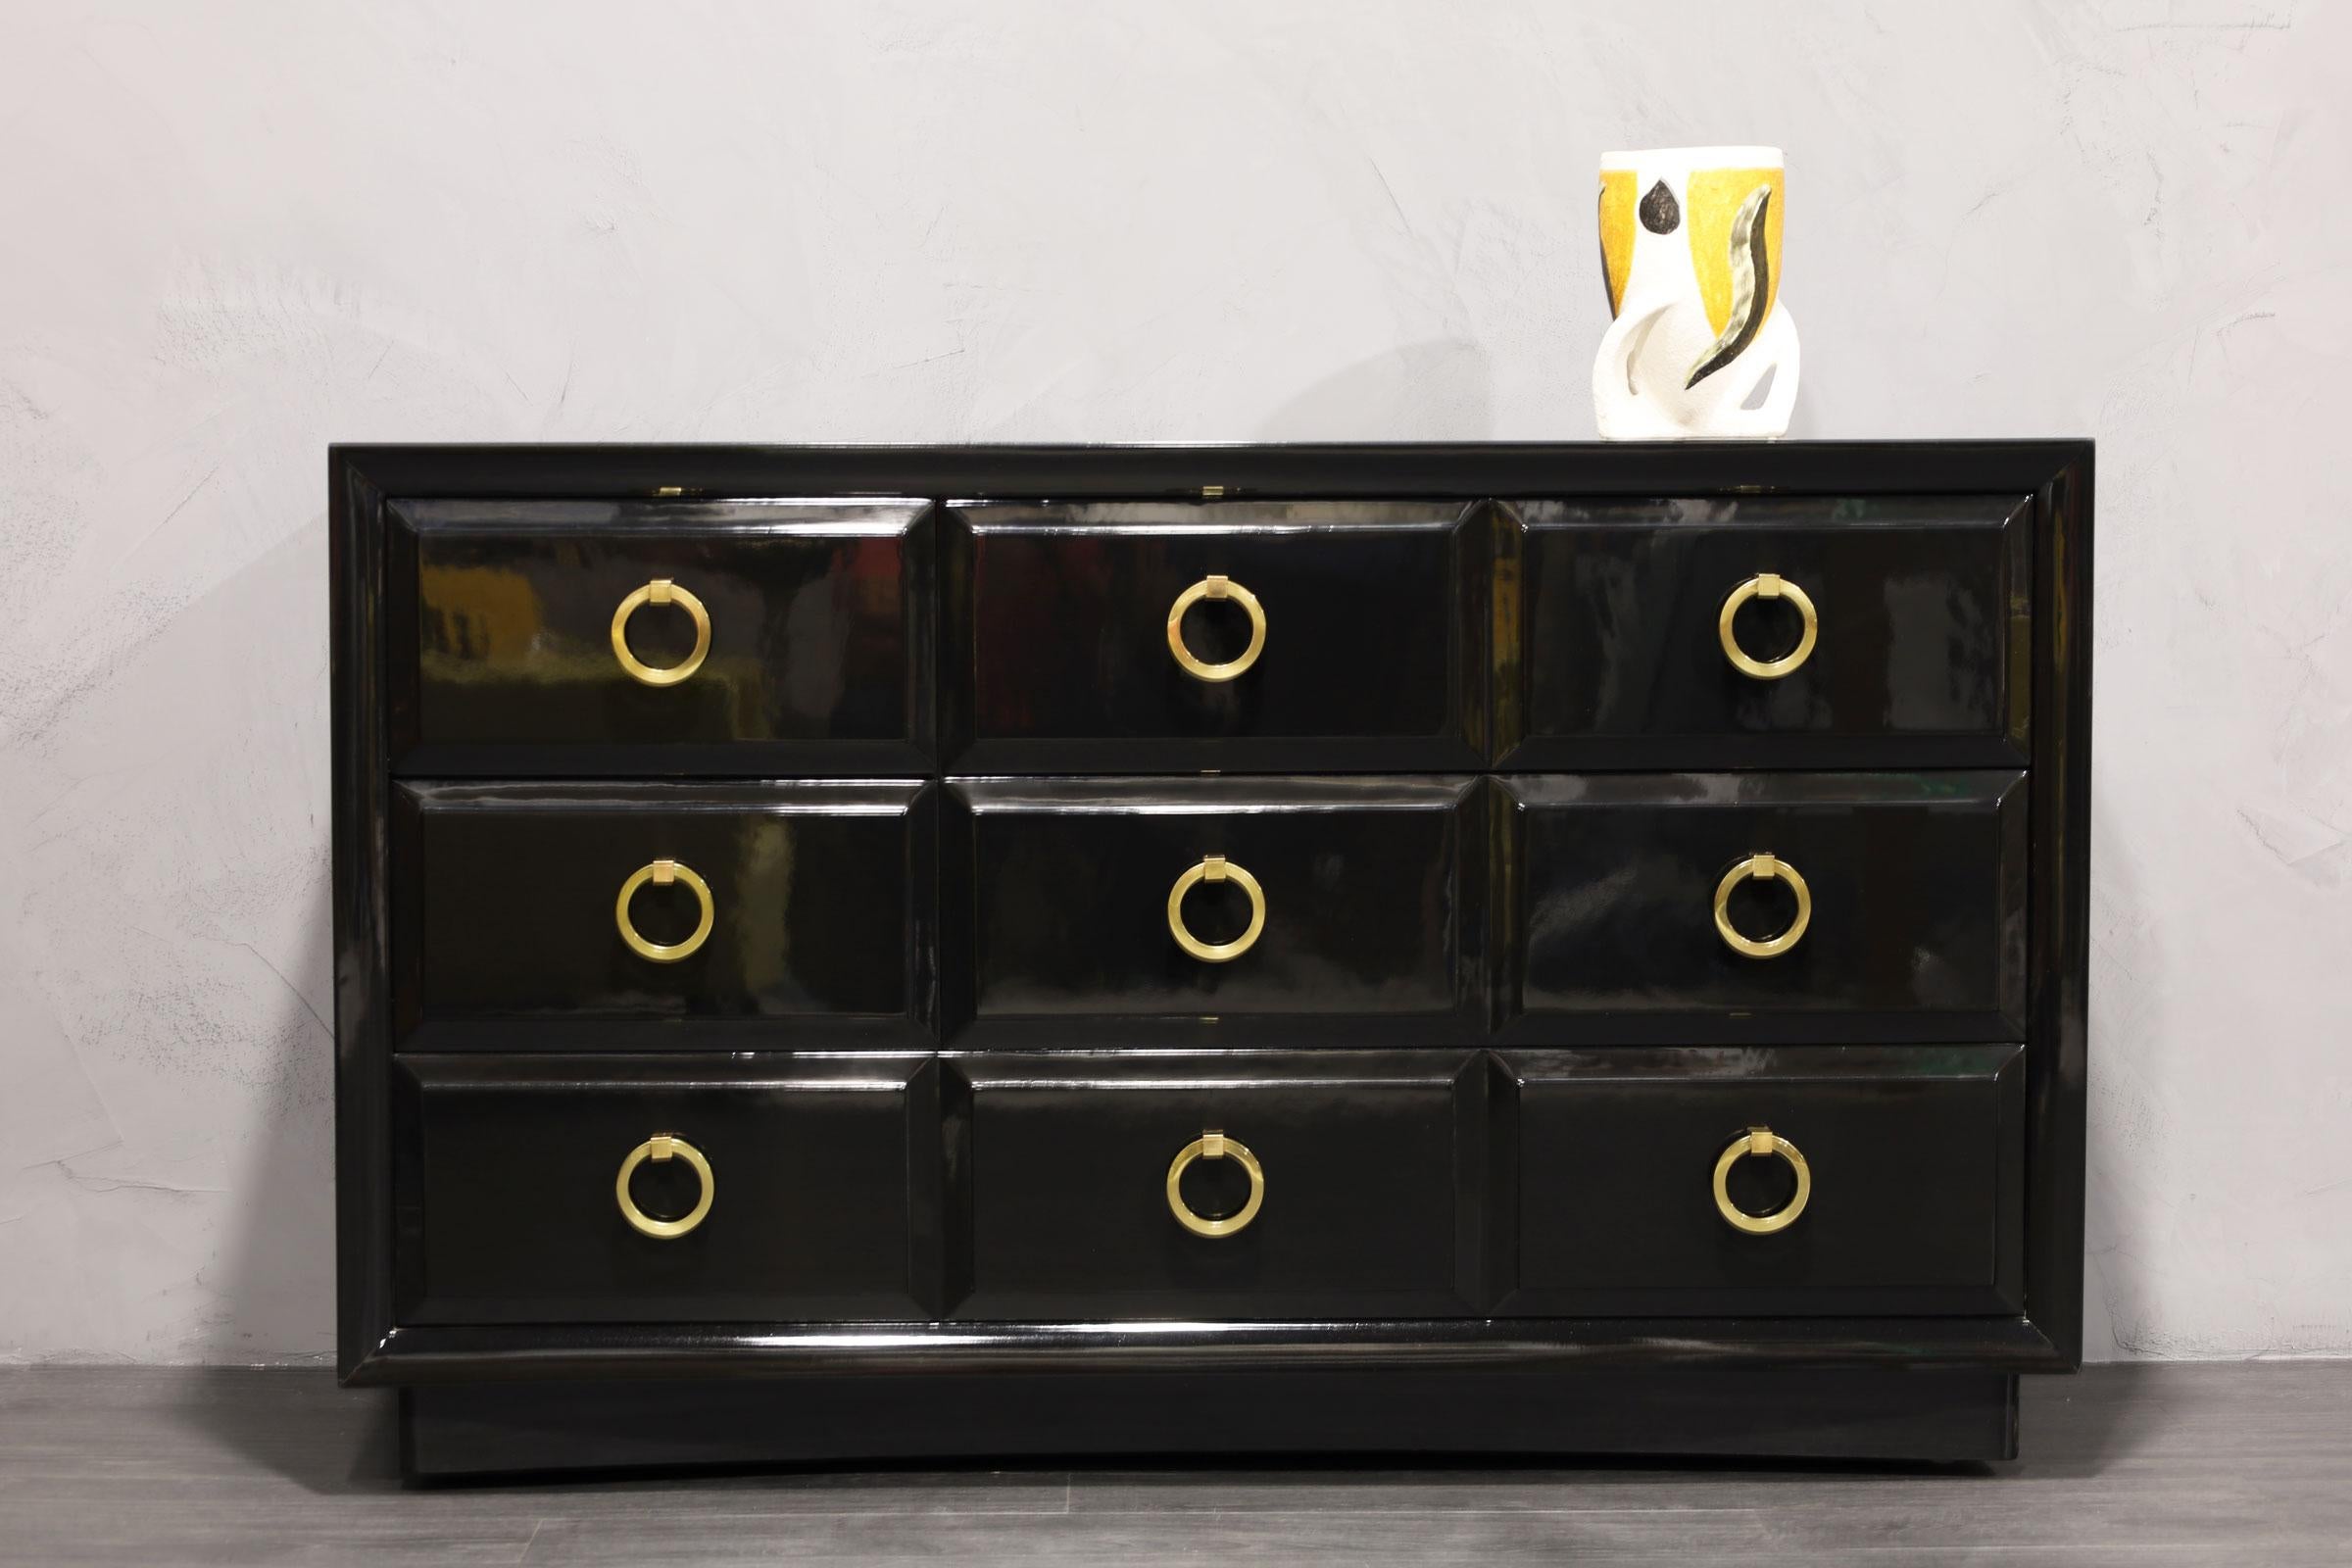 A beautifully restored cabinet by Robsjohn-Gibbings for Widdicomb. This is a classic and quite substantial. We have expertly black lacquered. Pulls are solid brass and have been polished and sealed.